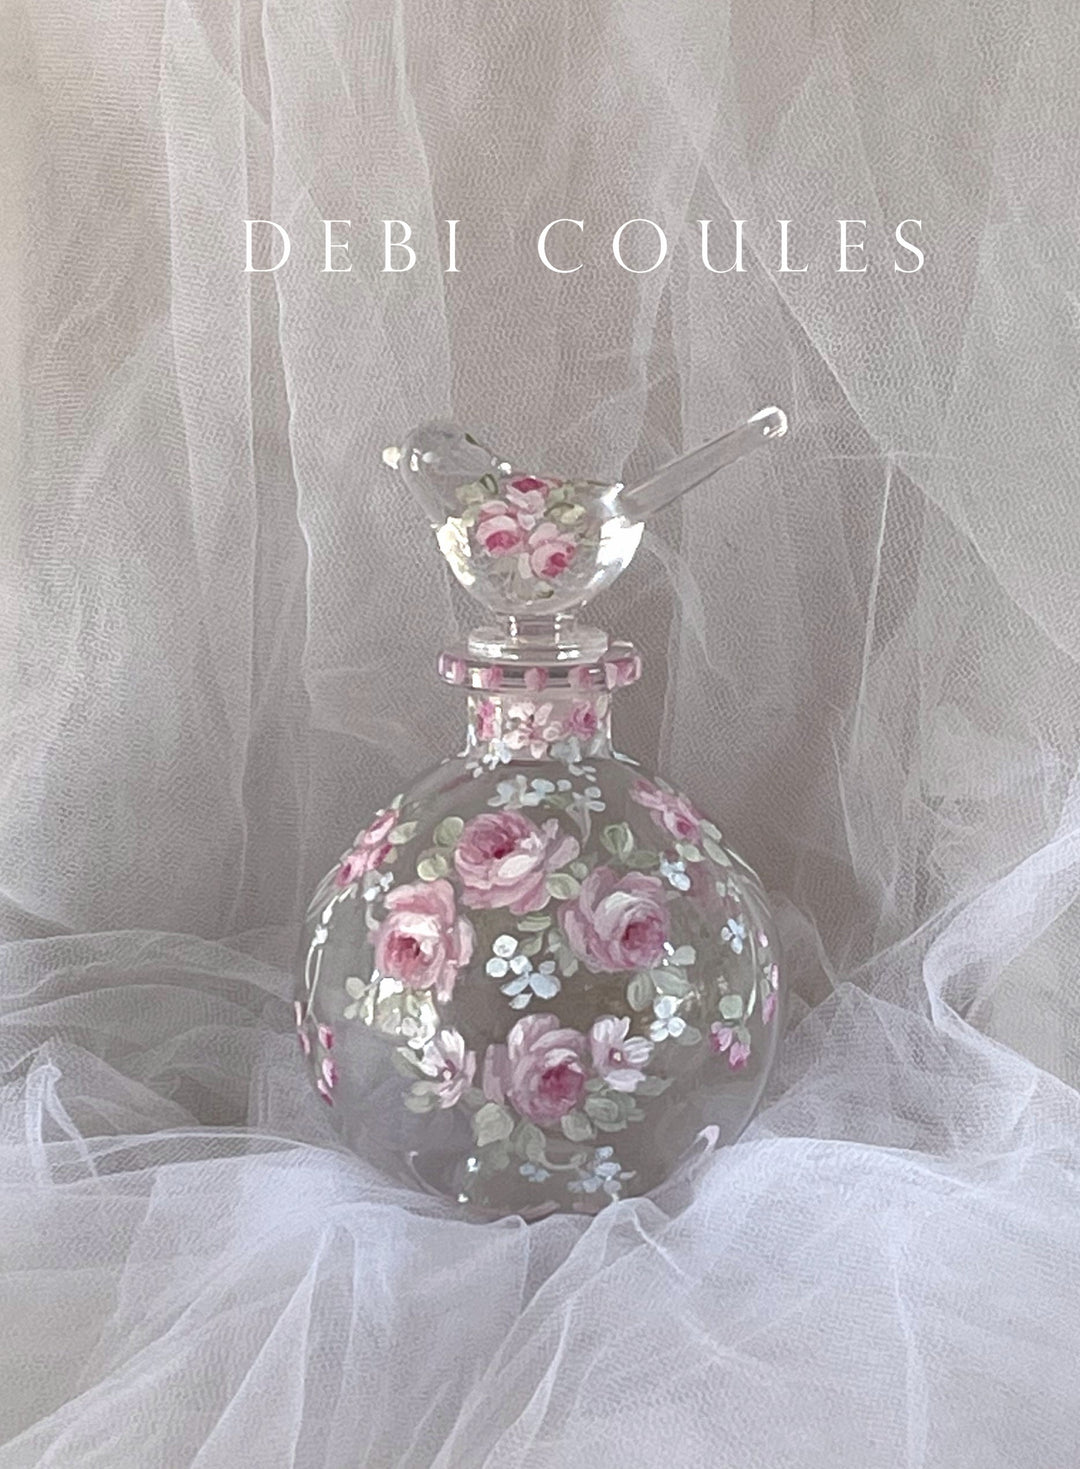 Charming hand painted glass perfume bottle with French roses, shades of pink and white. blue and white wildflowers mingle, bird stopper also has roses. Original Vintage Shabby Chic look by Debi Coules